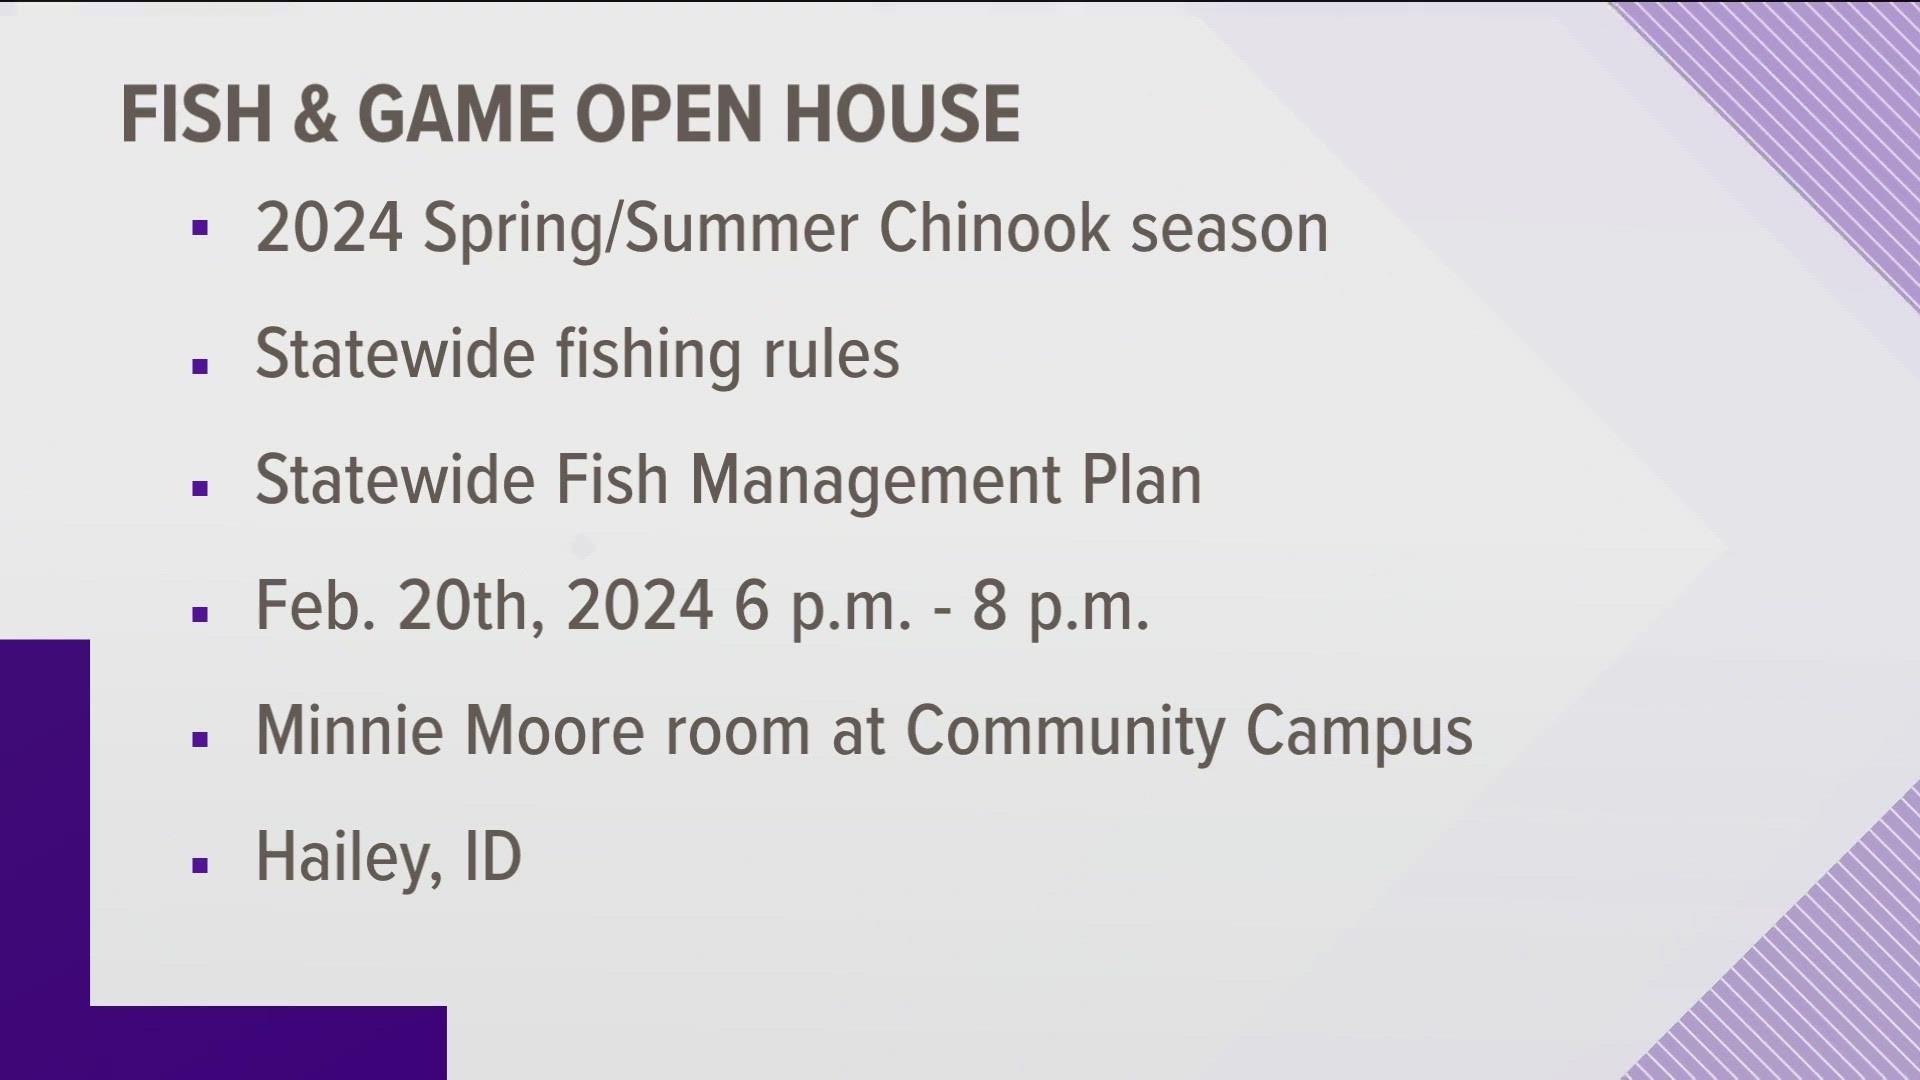 The open house is Feb. 20 at the CSI Blaine County Center Community Campus.